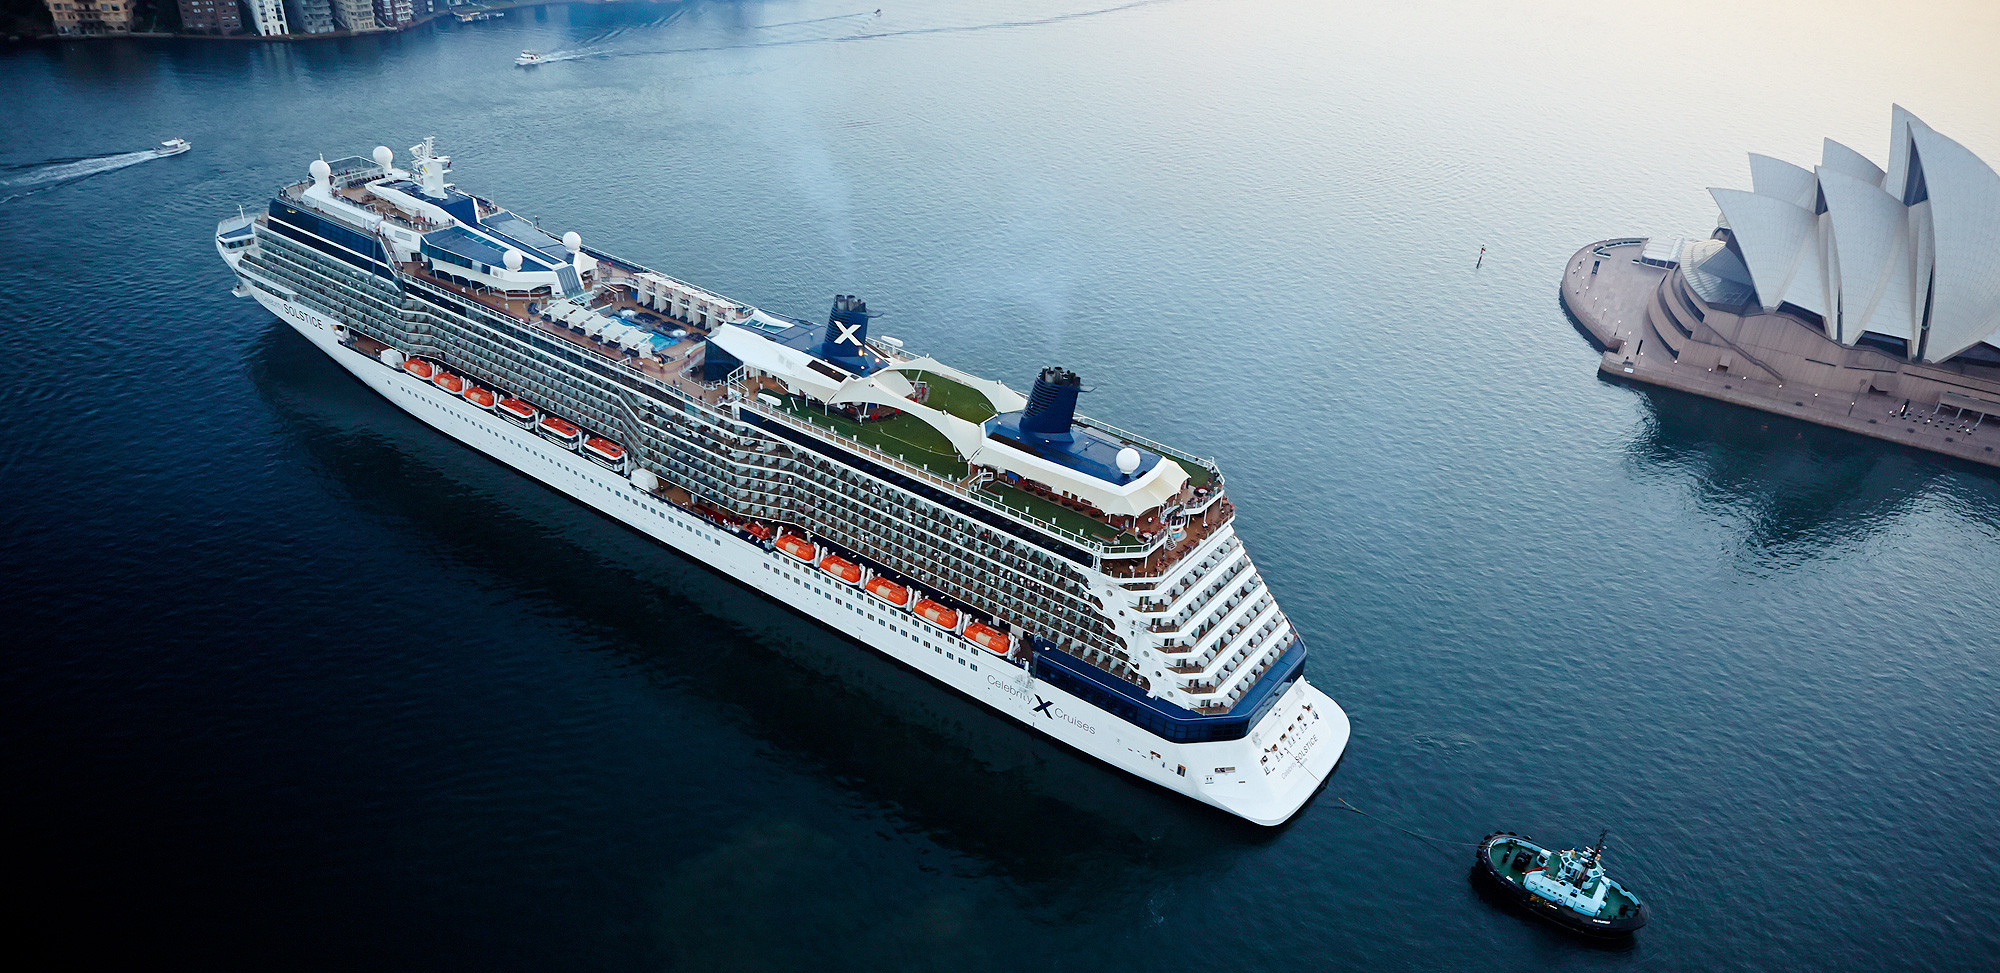 Celebrity Solstice Class Ships | Cruise The Realm